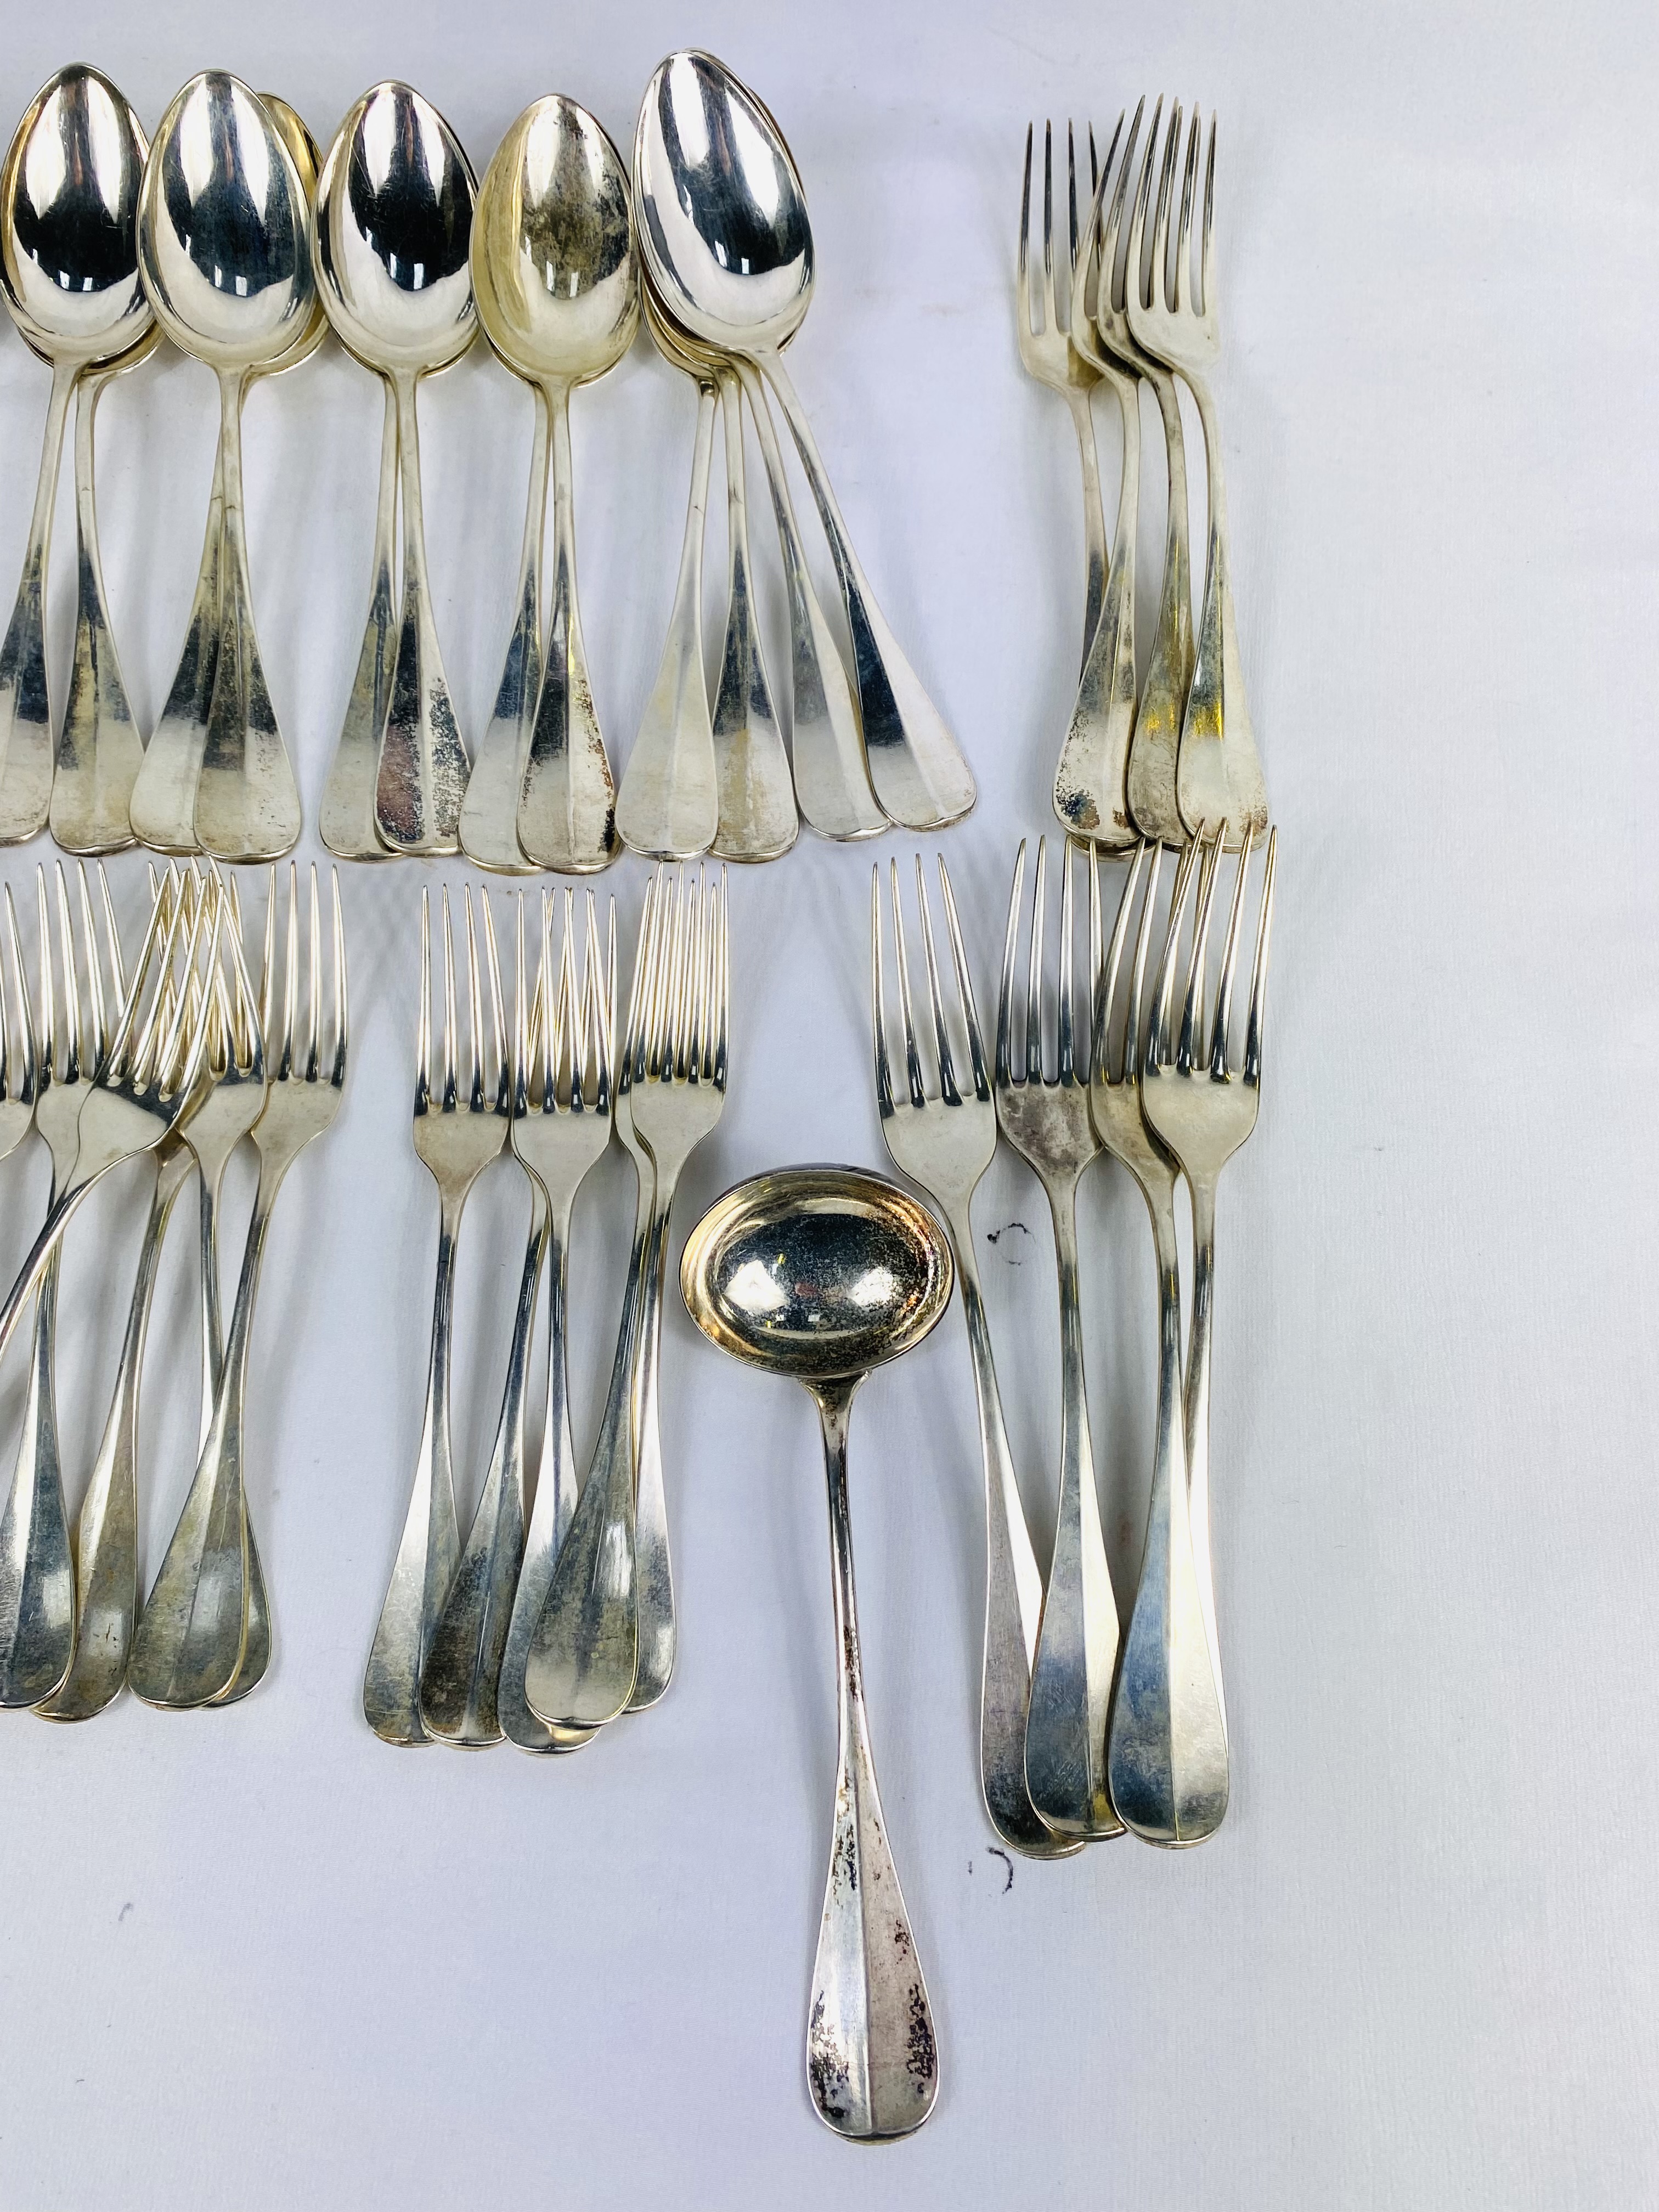 Part set of German 800 silver cutlery, 2488g (80ozt) - Image 2 of 8